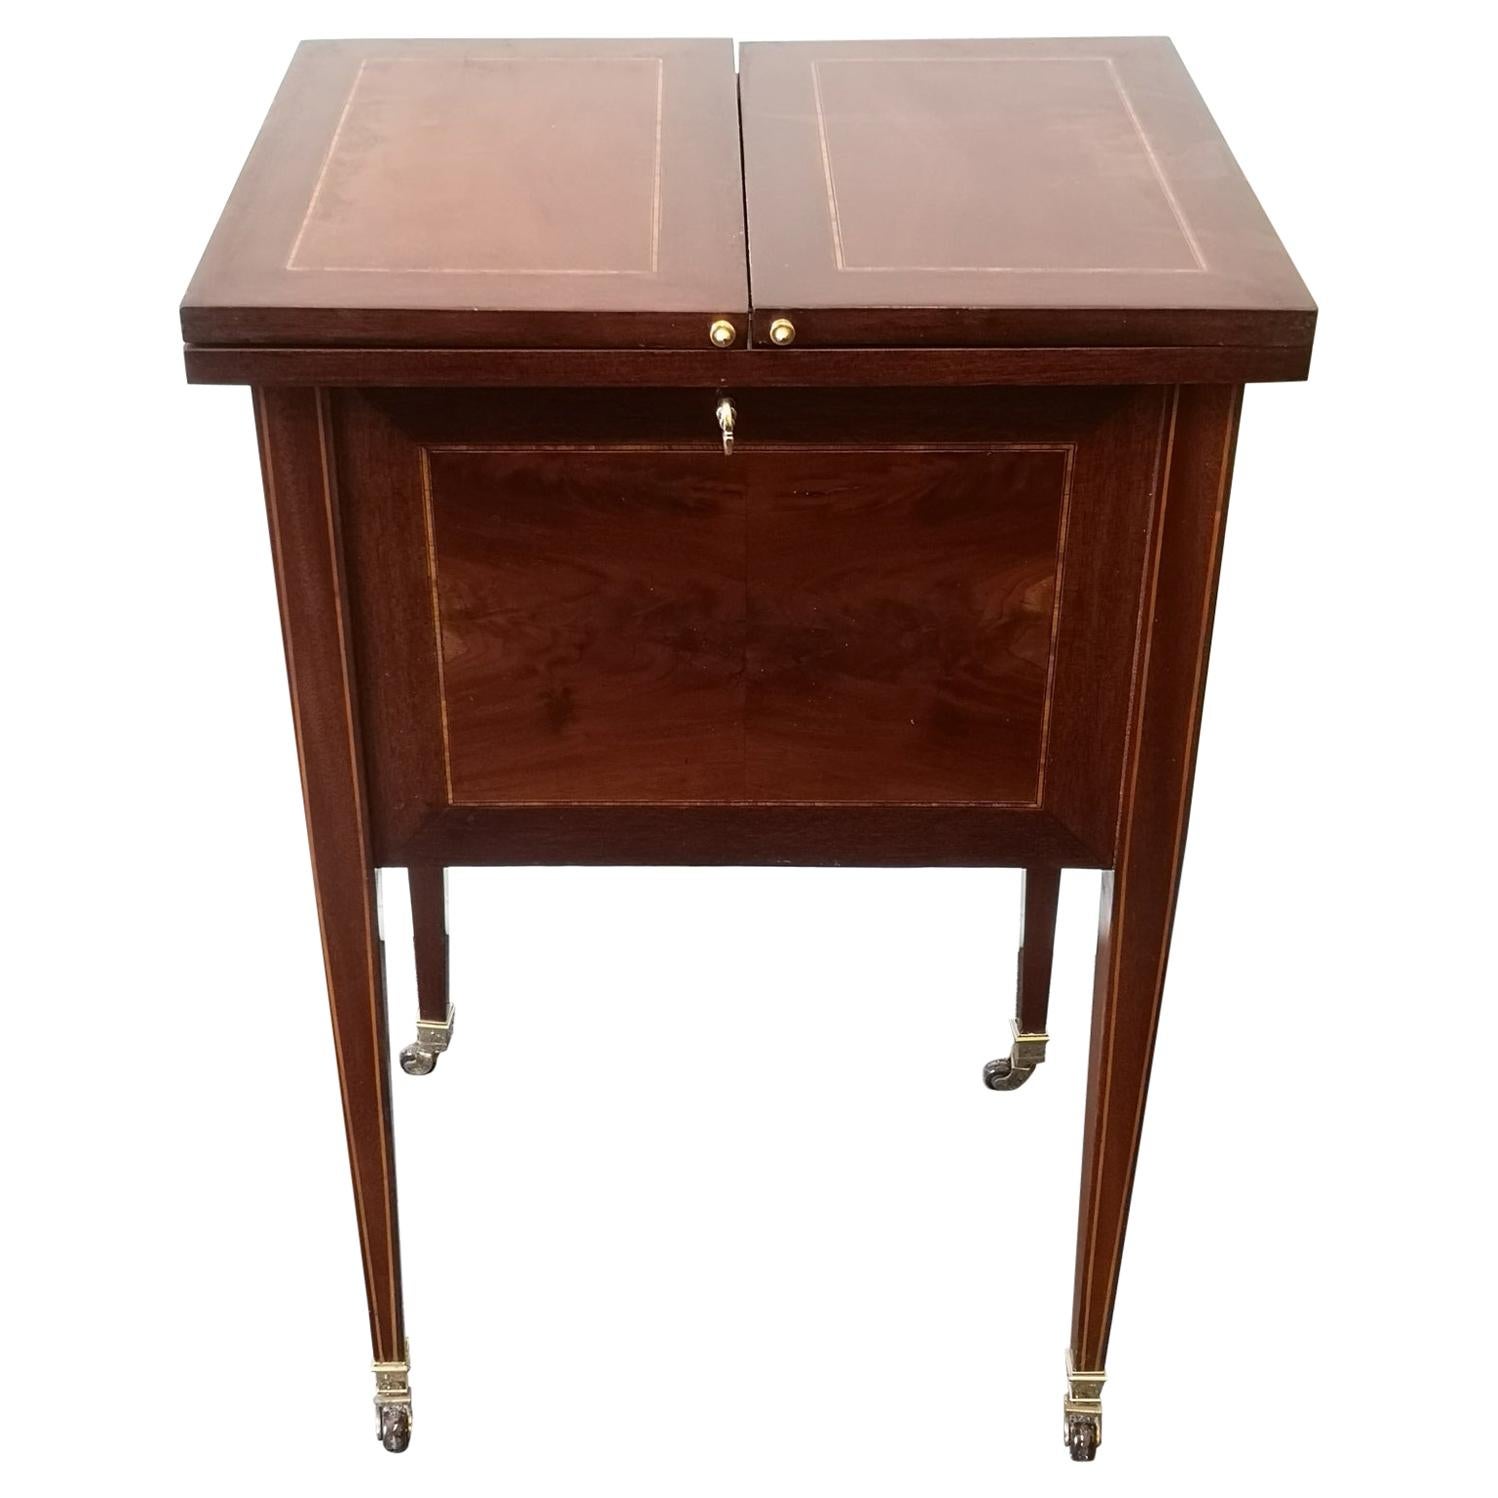 Late 19th Century Mahogany Inlaid Pop Up Surprise Bar / Drinks Table For Sale